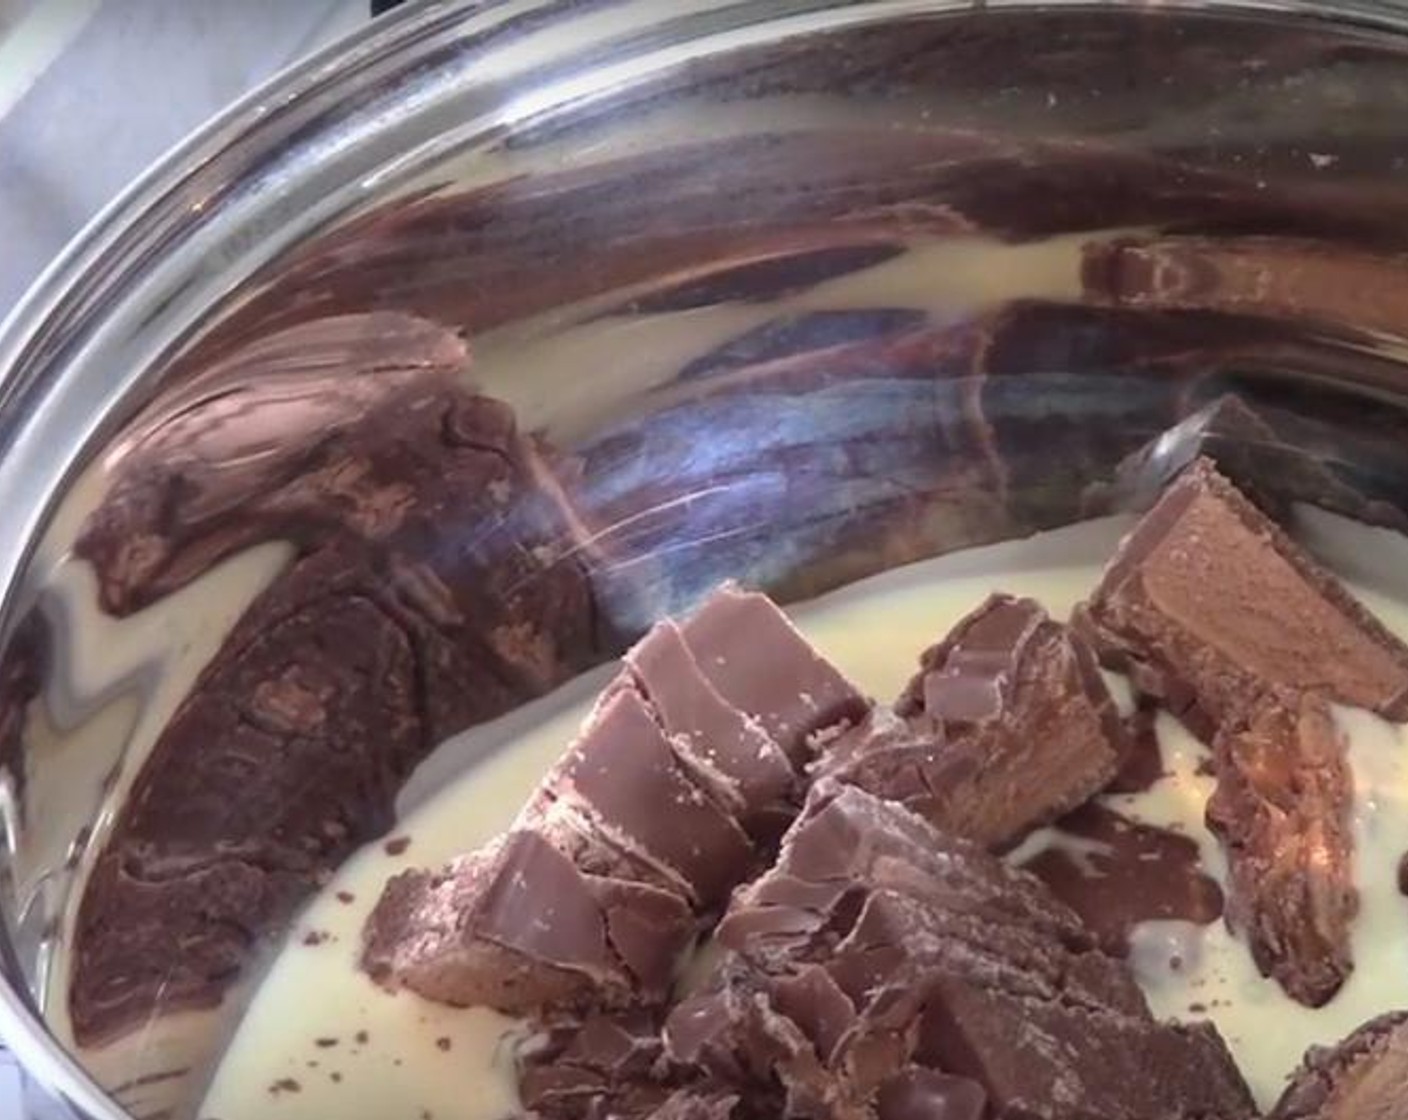 step 1 For the milk chocolate dip: In a saucepa​n, put Whipping Cream (1/3 cup) and Mars® Bar (3/4 cup). Over a low to medium heat, stir them for five to ten minutes. If there are a few lumps in the mix after that, use a whisk to get rid of them. Transfer to a serving bowl and allow to cool.